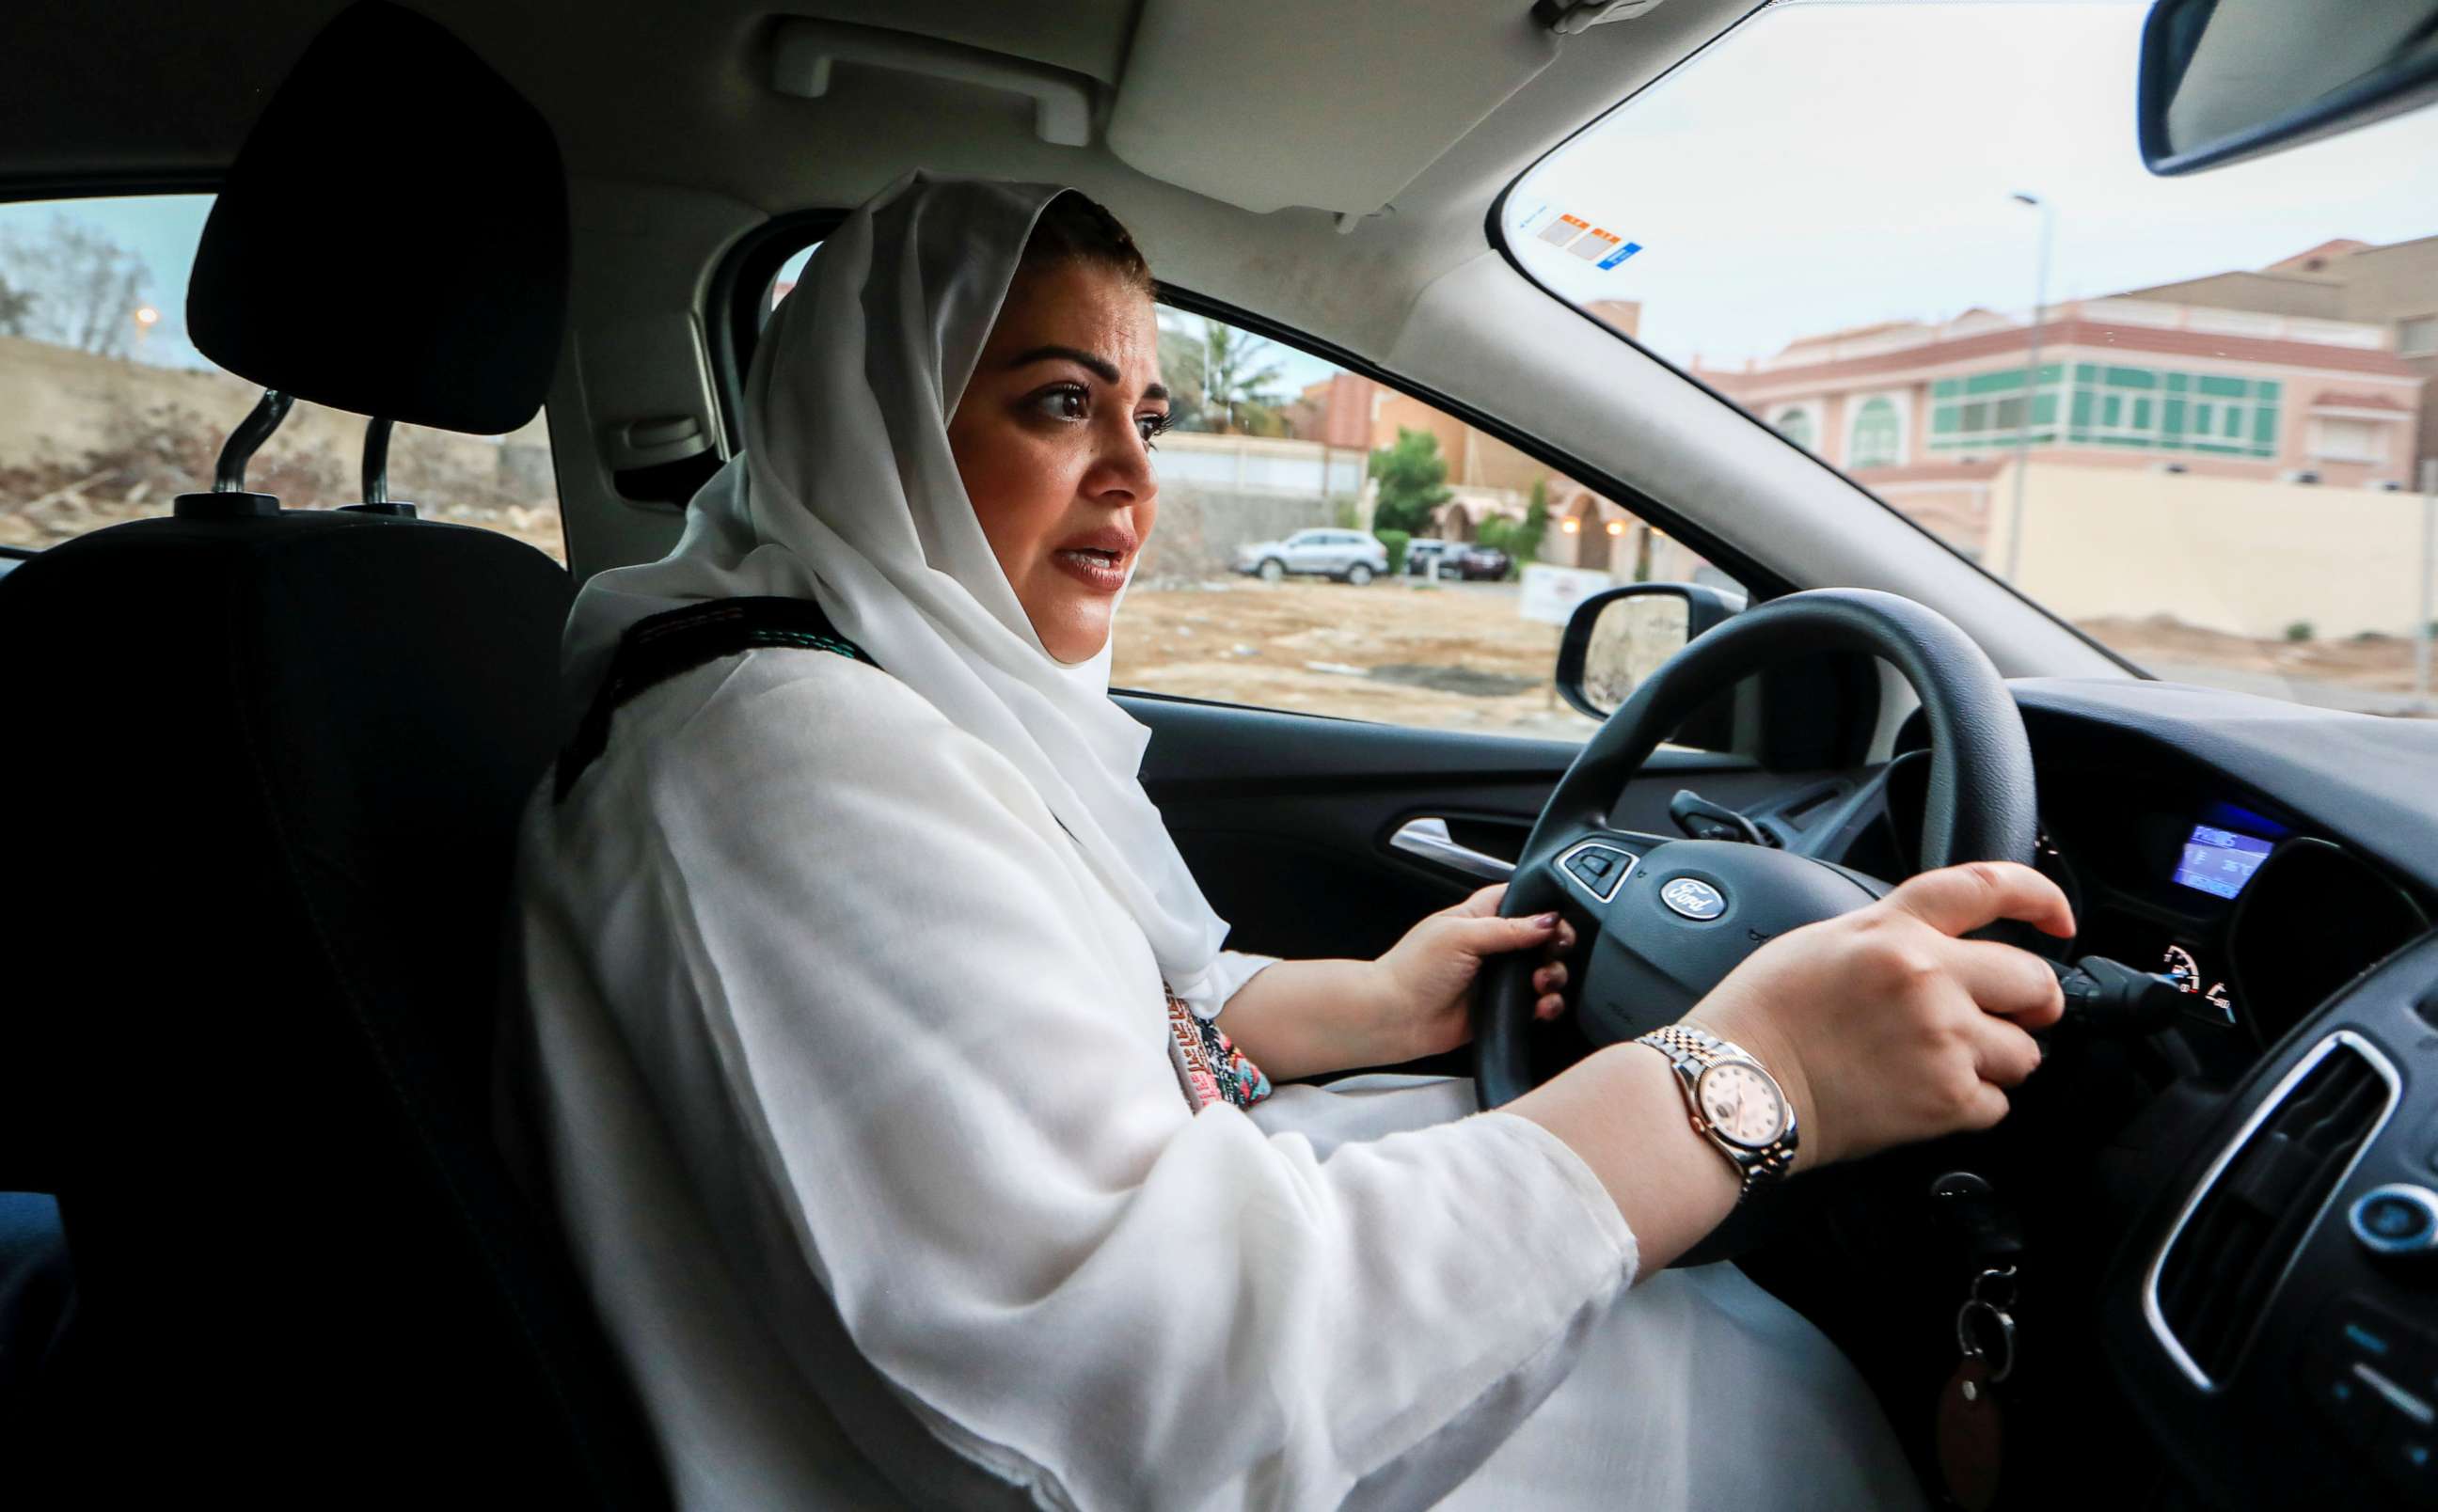 PHOTO: Dr Samira al-Ghamdi, 47, a practicing psychologist, drives around the side roads of a neighborhood as she prepares to hit the road on Sunday as a licensed driver, in Jeddah, Saudi Arabia June 21, 2018.